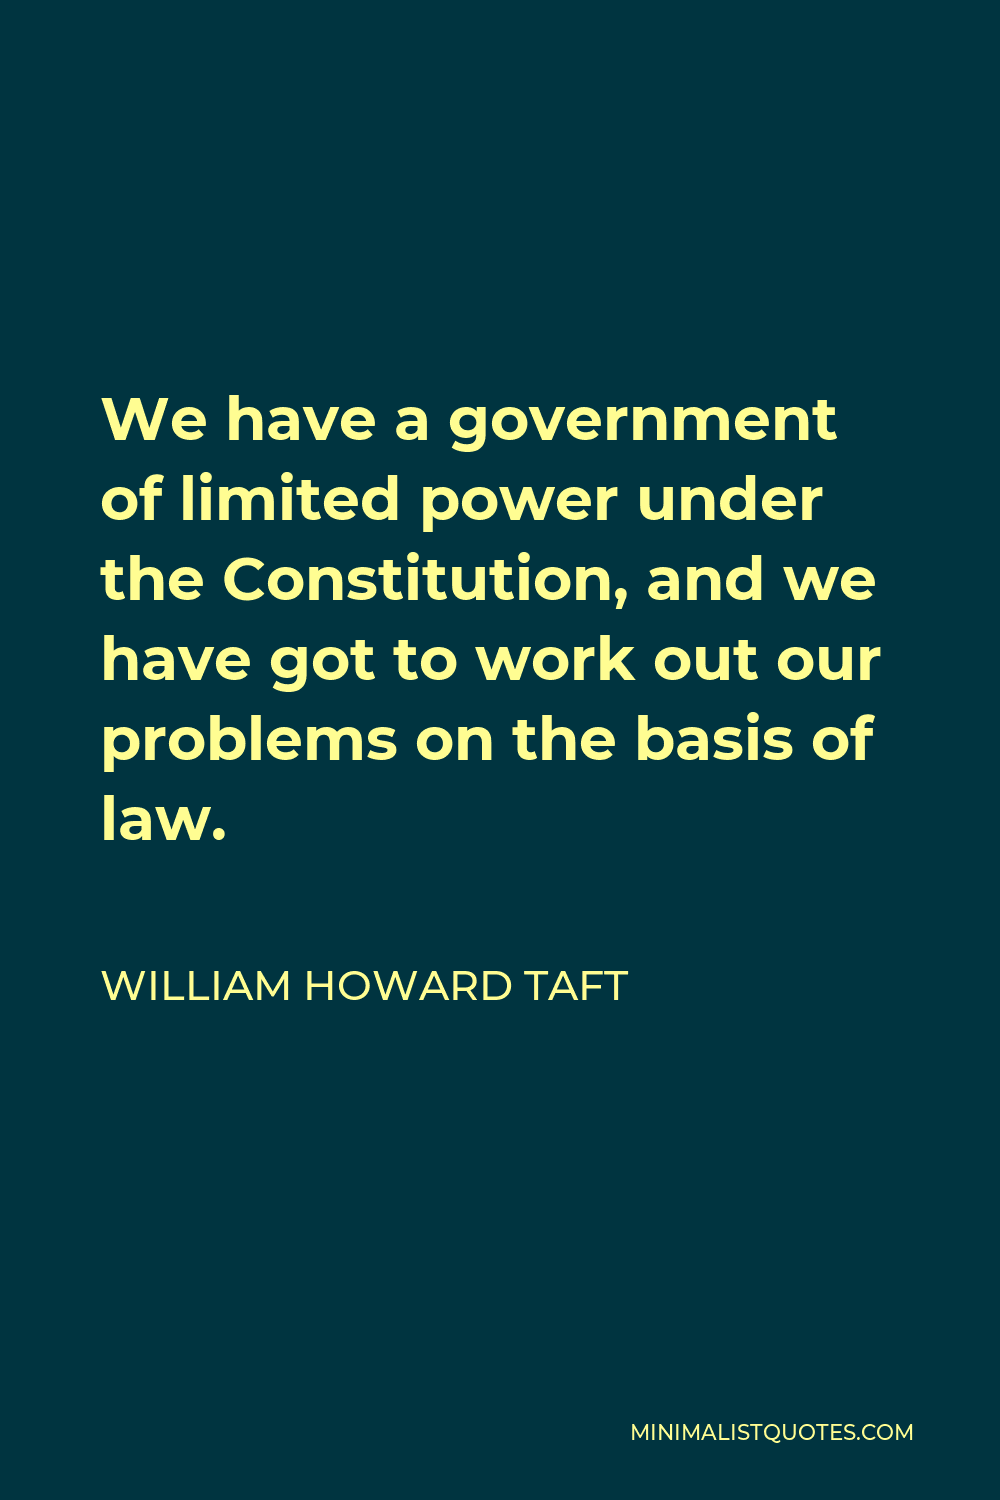 William Howard Taft Quote - We have a government of limited power under the Constitution, and we have got to work out our problems on the basis of law.